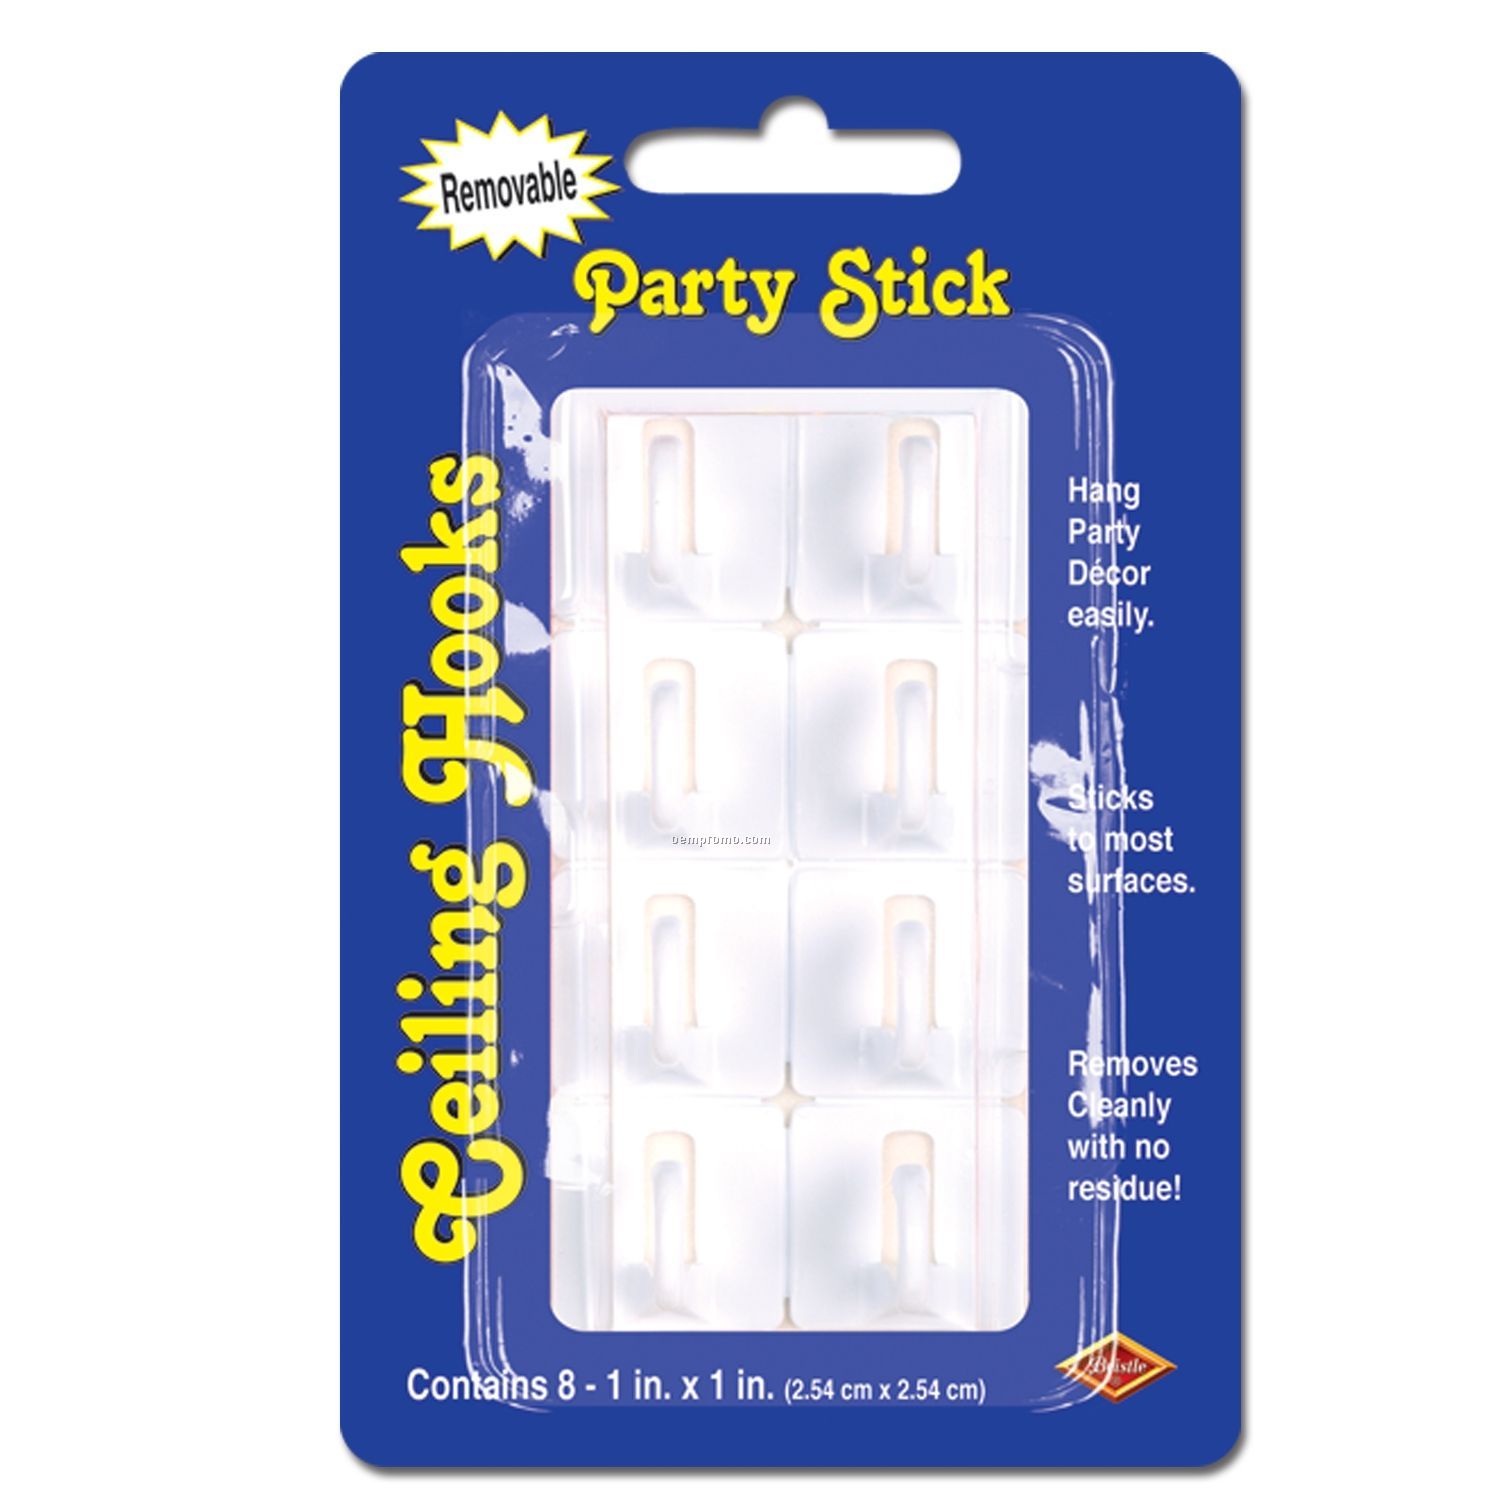 Party Stick Ceiling Hooks